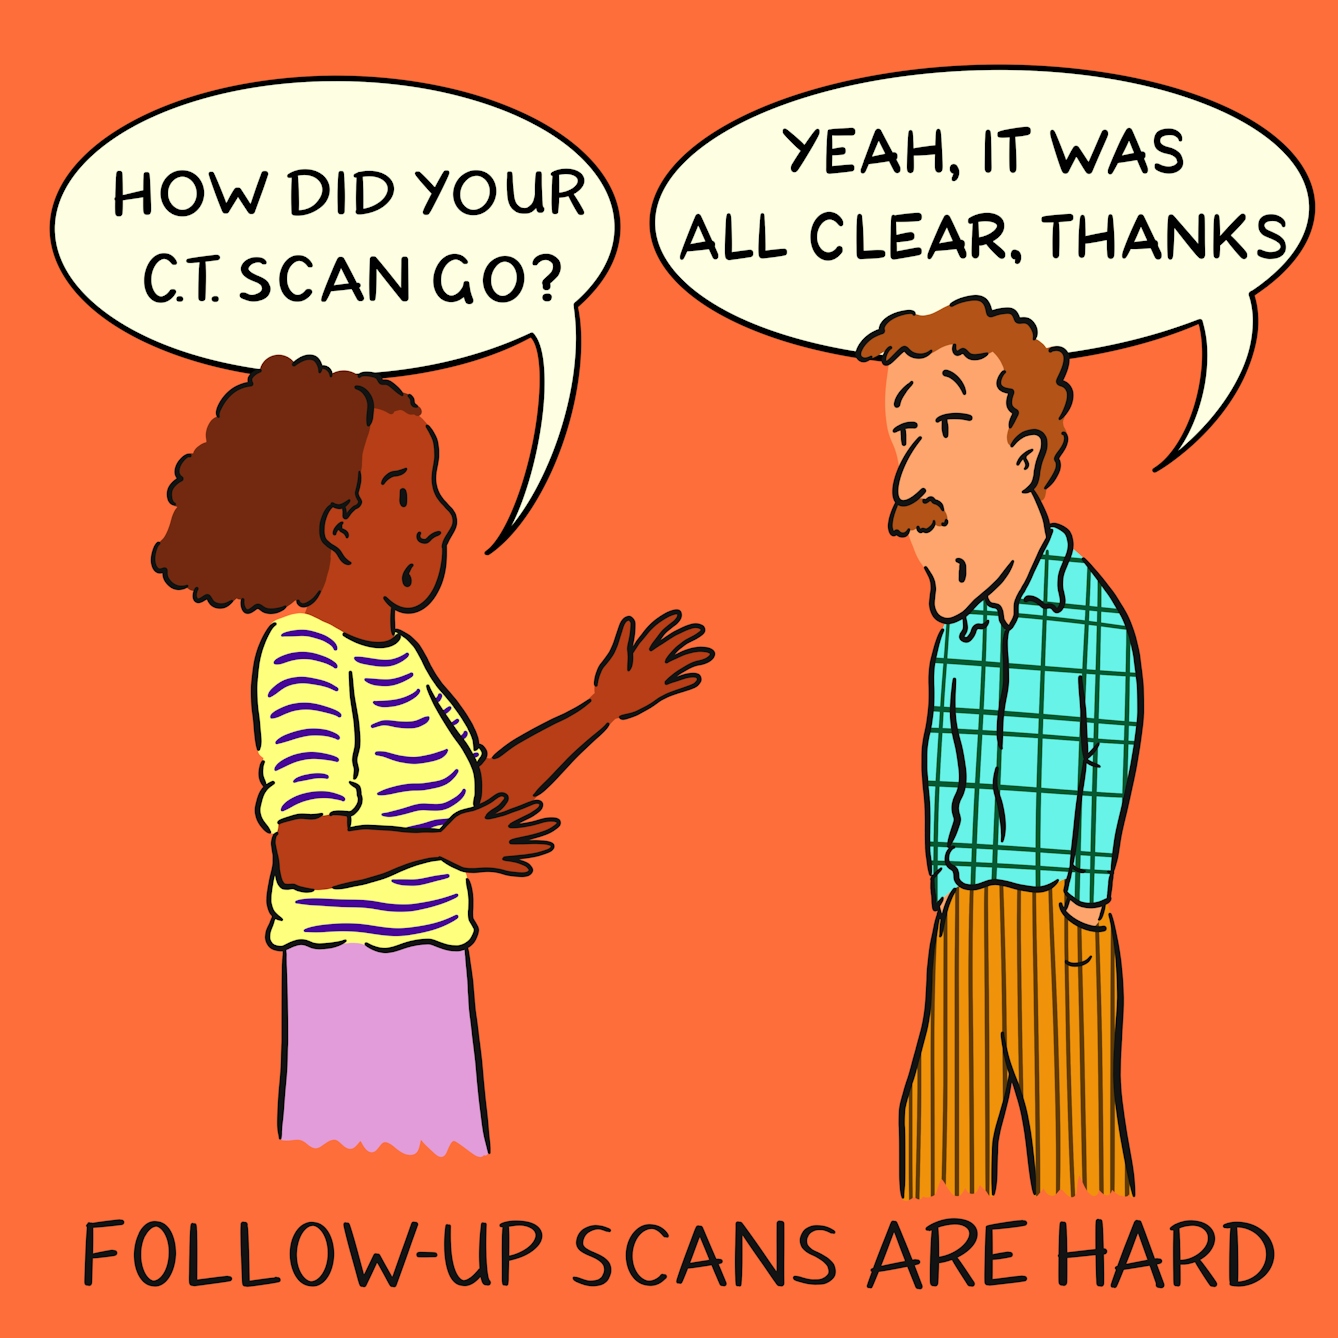 Panel 1 of a four-panel comic drawn digitally: a black woman with a stripy yellow shirt and outreched hands asks "How did your CT scan go?" and a white man with a moustache and a plaid shirt, with an inscrutible expression and hands jammed into pockets of his corduory trousers replies "Yeah, it was all clear, thanks". The caption text reads "Follow-up scans are hard"